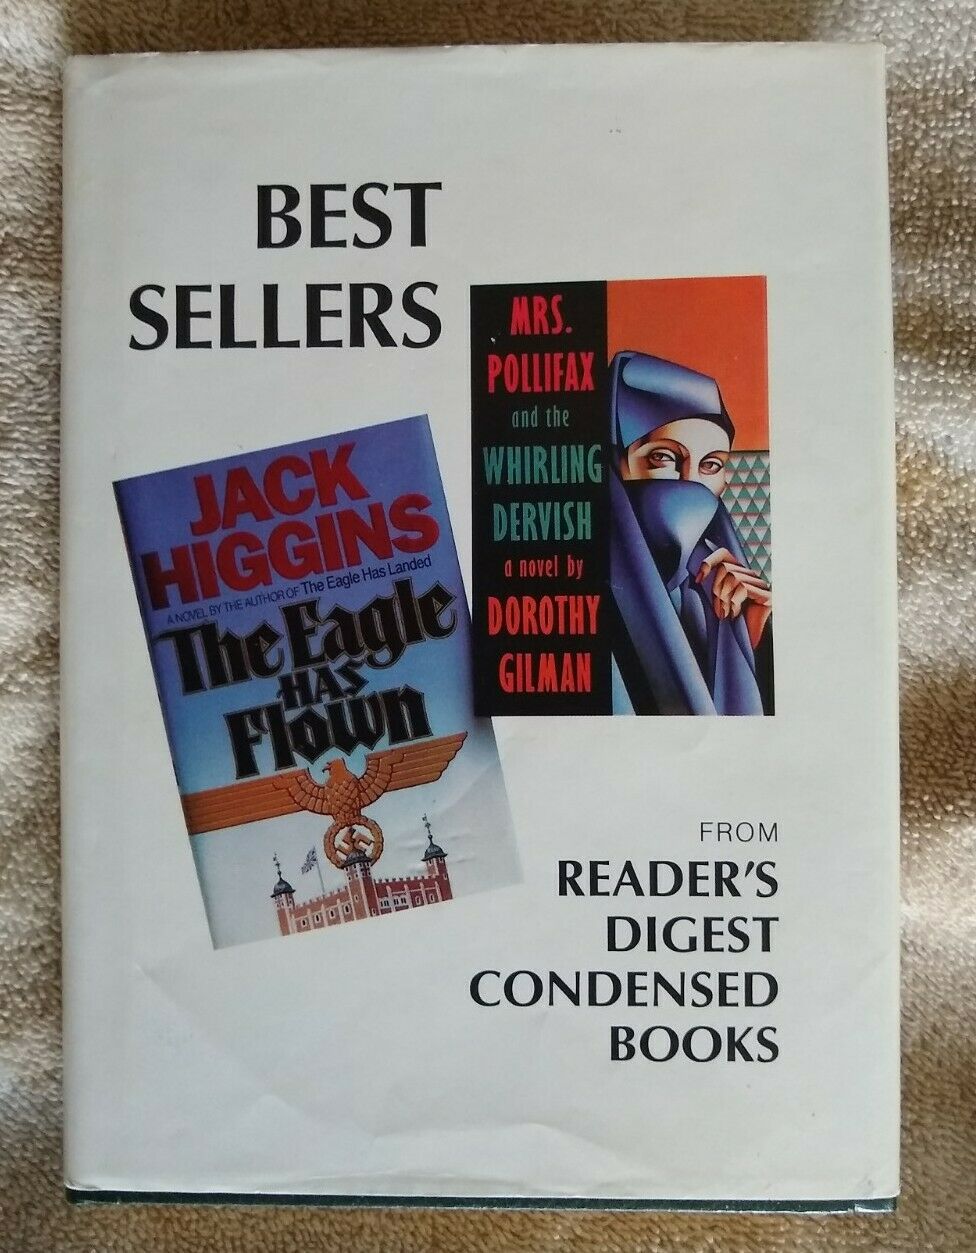 Best Sellers from Reader's Digest Condensed Books: The Eagle Has